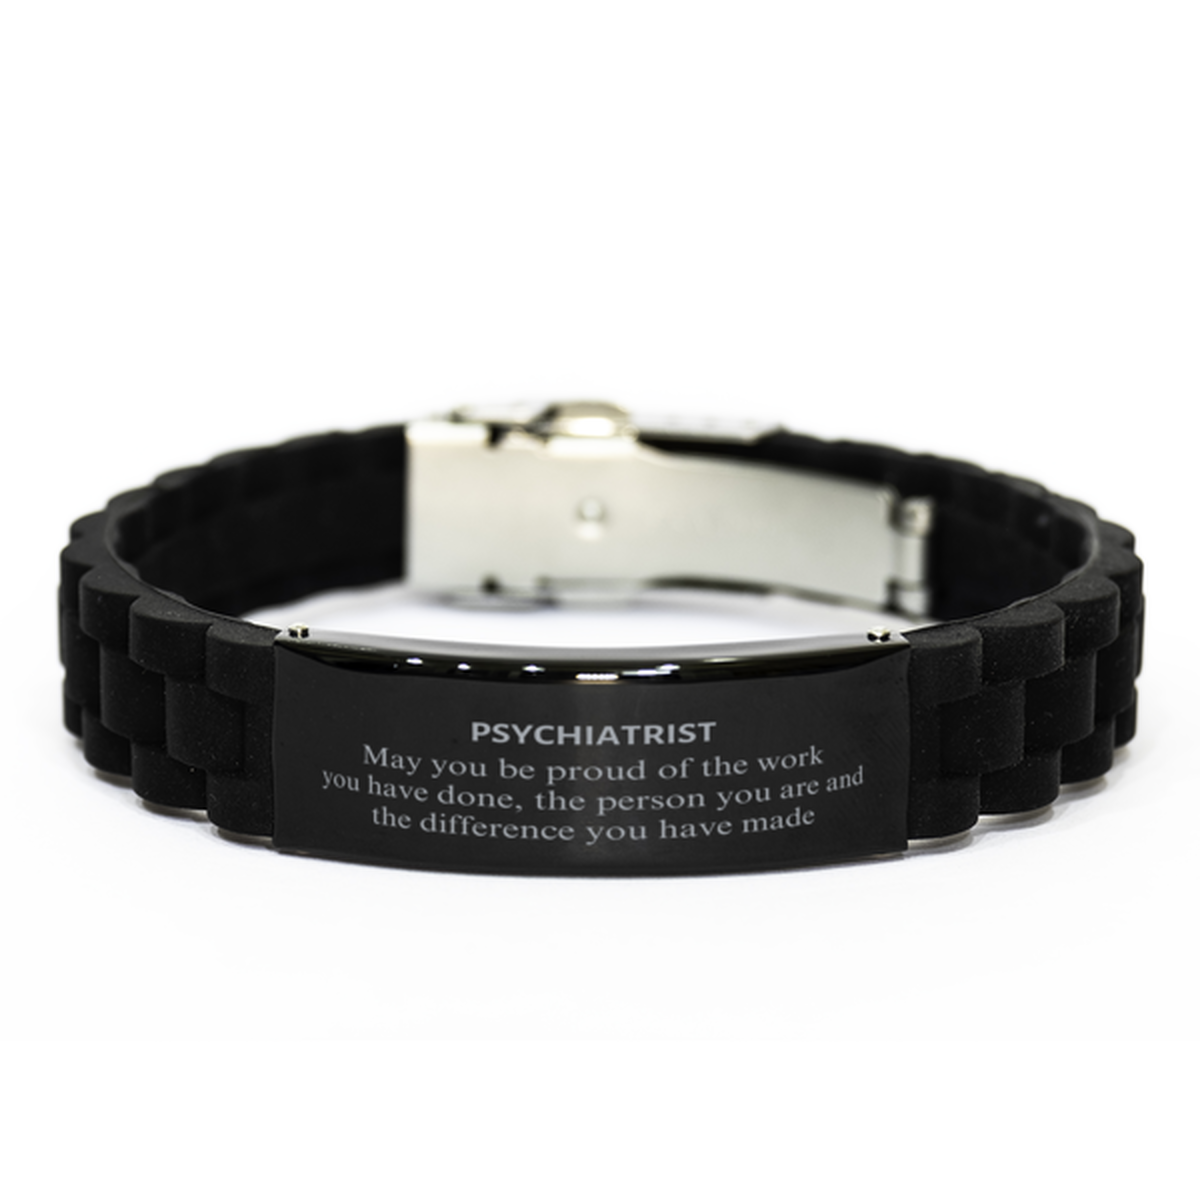 Psychiatrist May you be proud of the work you have done, Retirement Psychiatrist Black Glidelock Clasp Bracelet for Colleague Appreciation Gifts Amazing for Psychiatrist